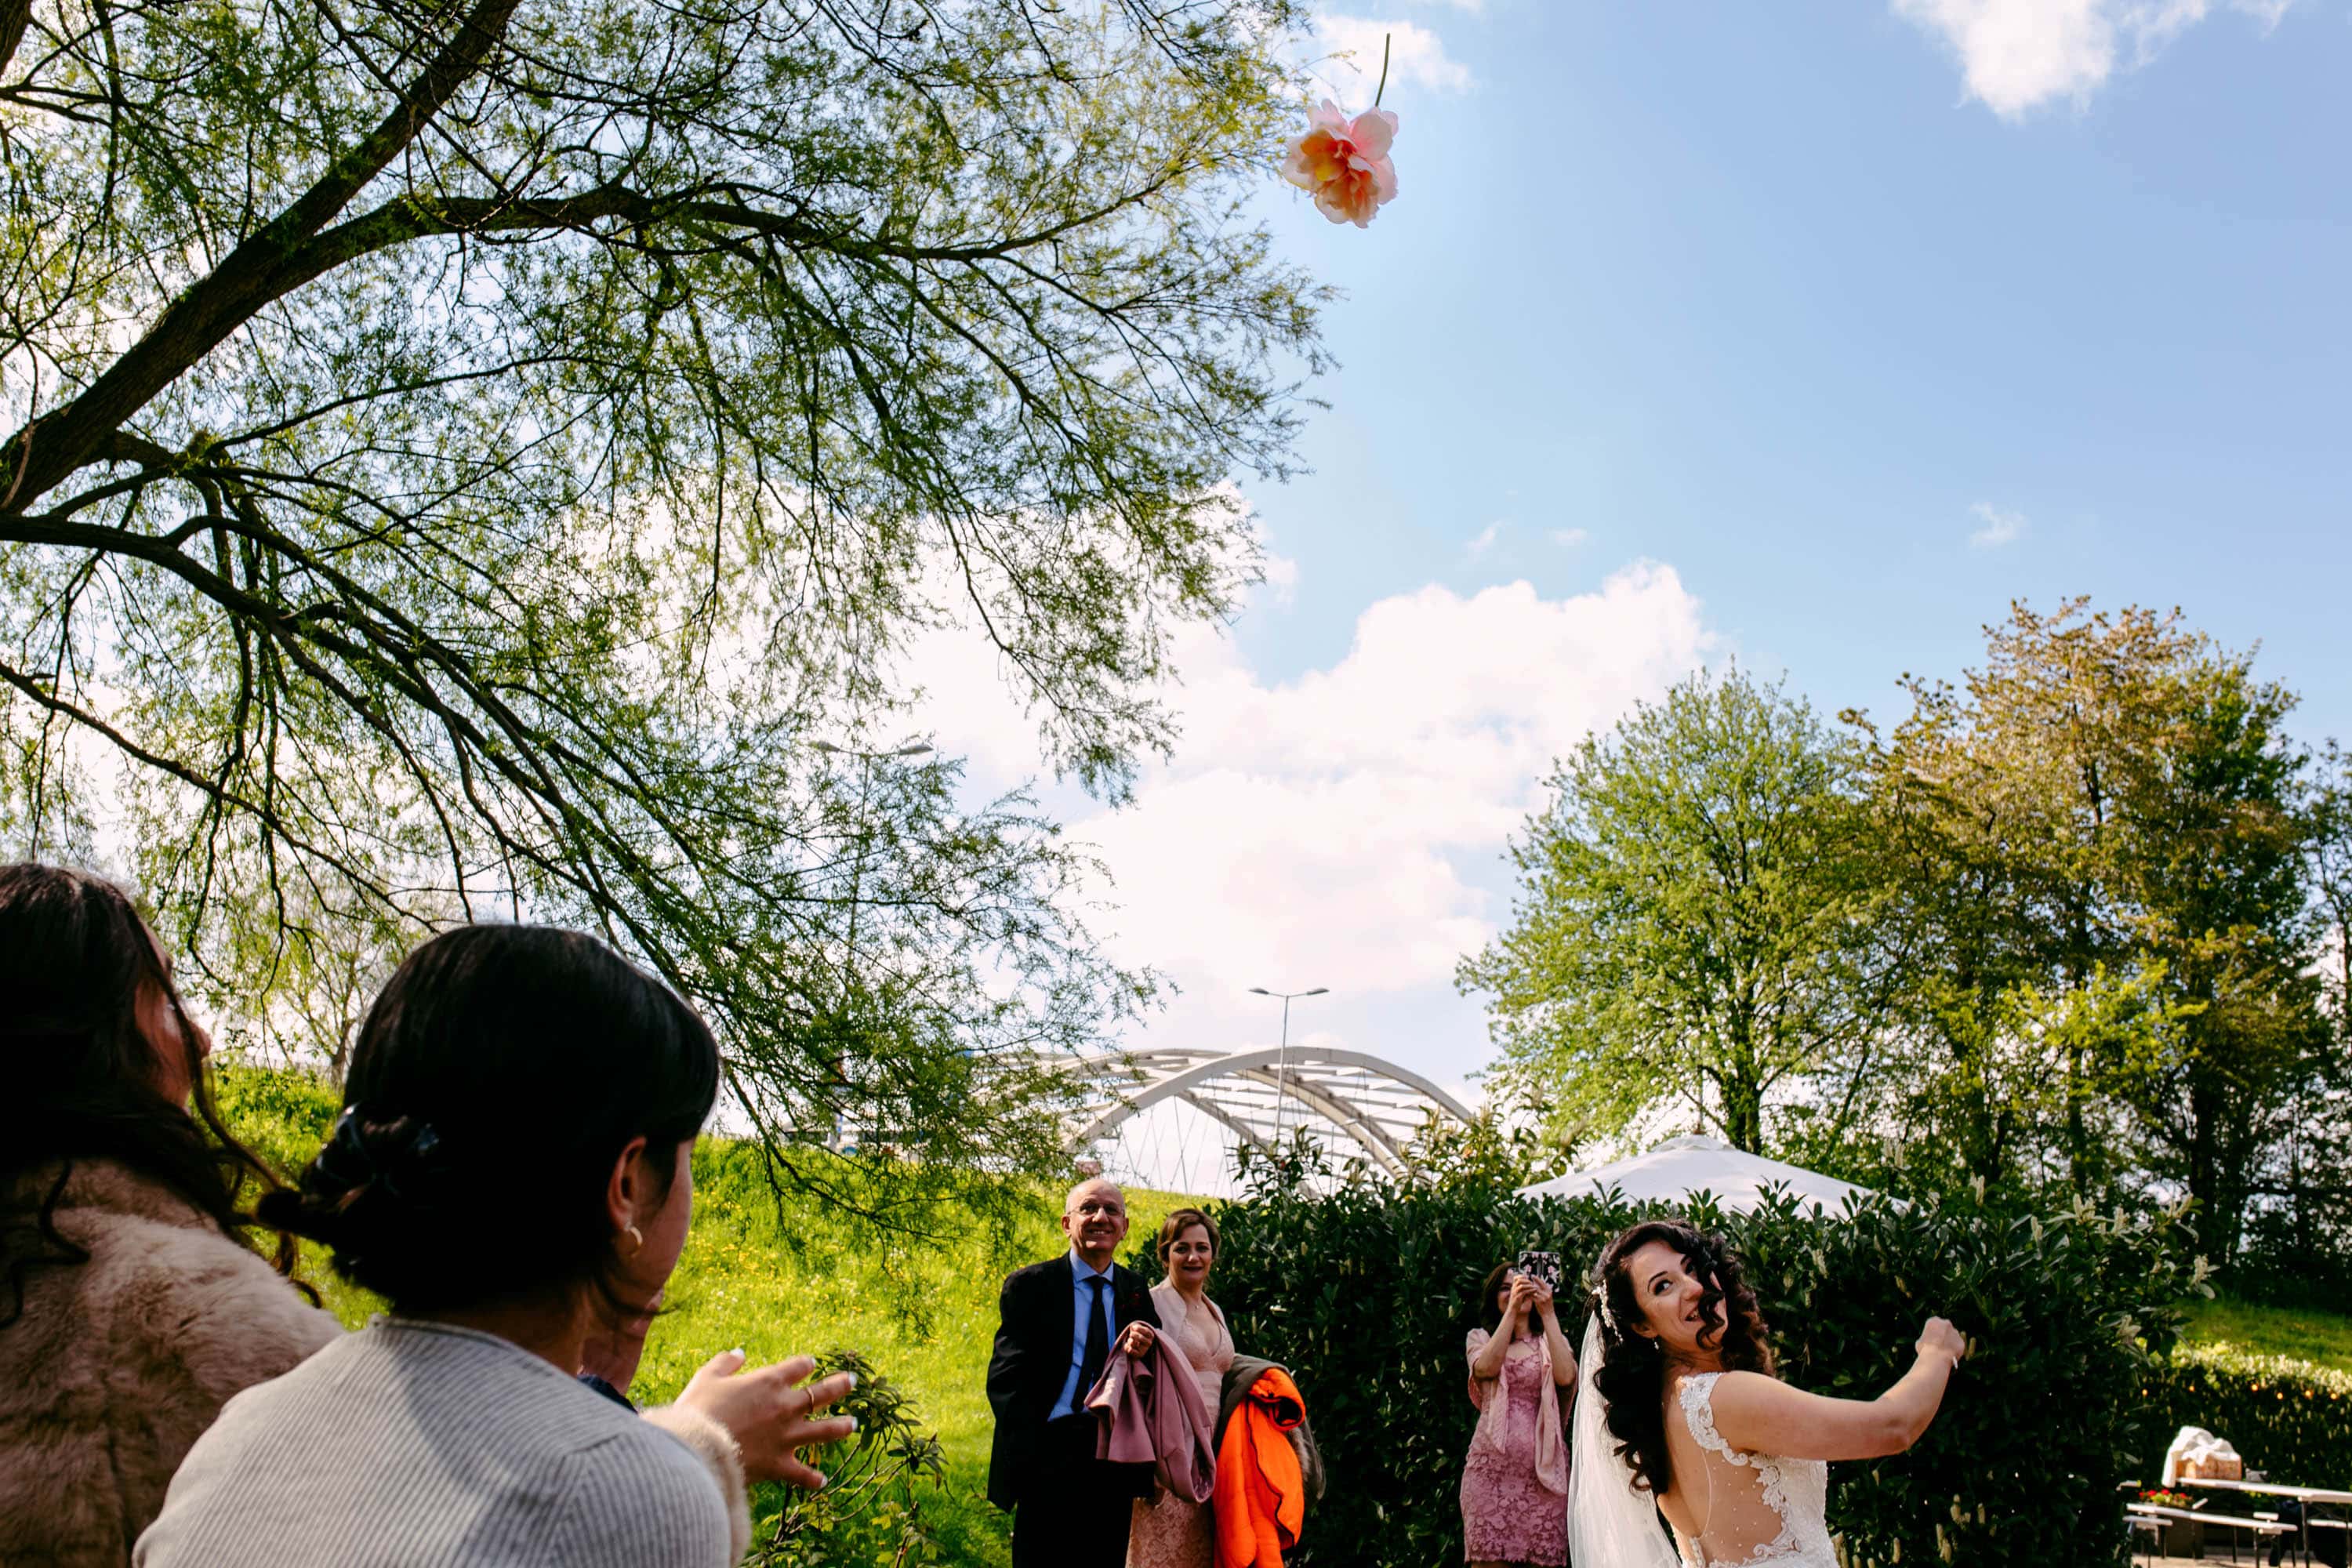 A bride and groom toss a kite in the air.